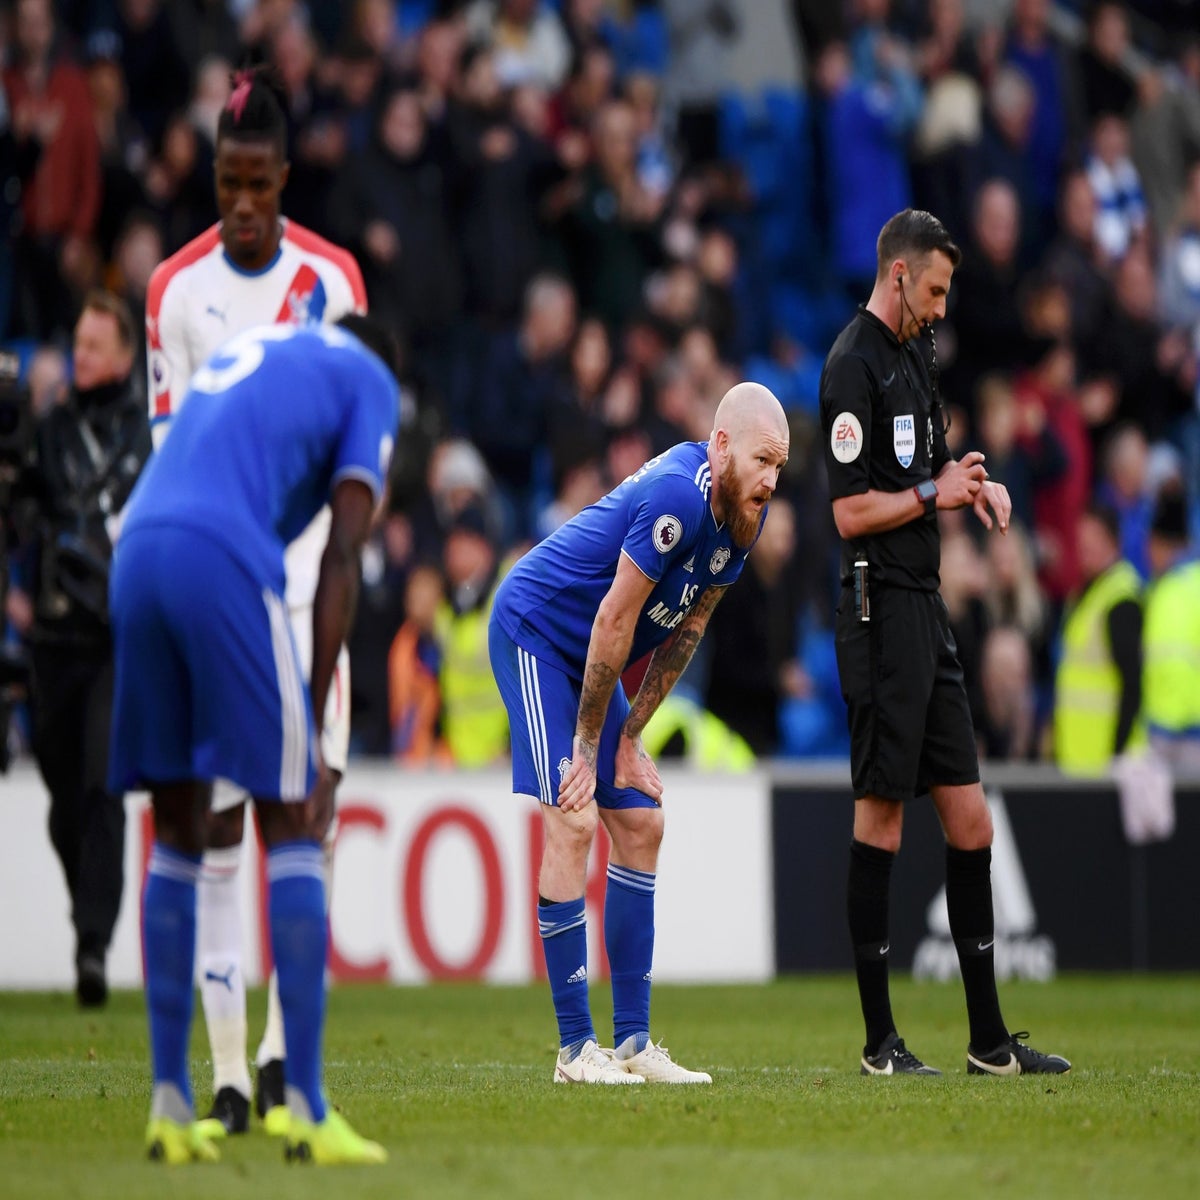 Chelsea 3-2 Brighton: 10-man Blues hold on in frantic finish to